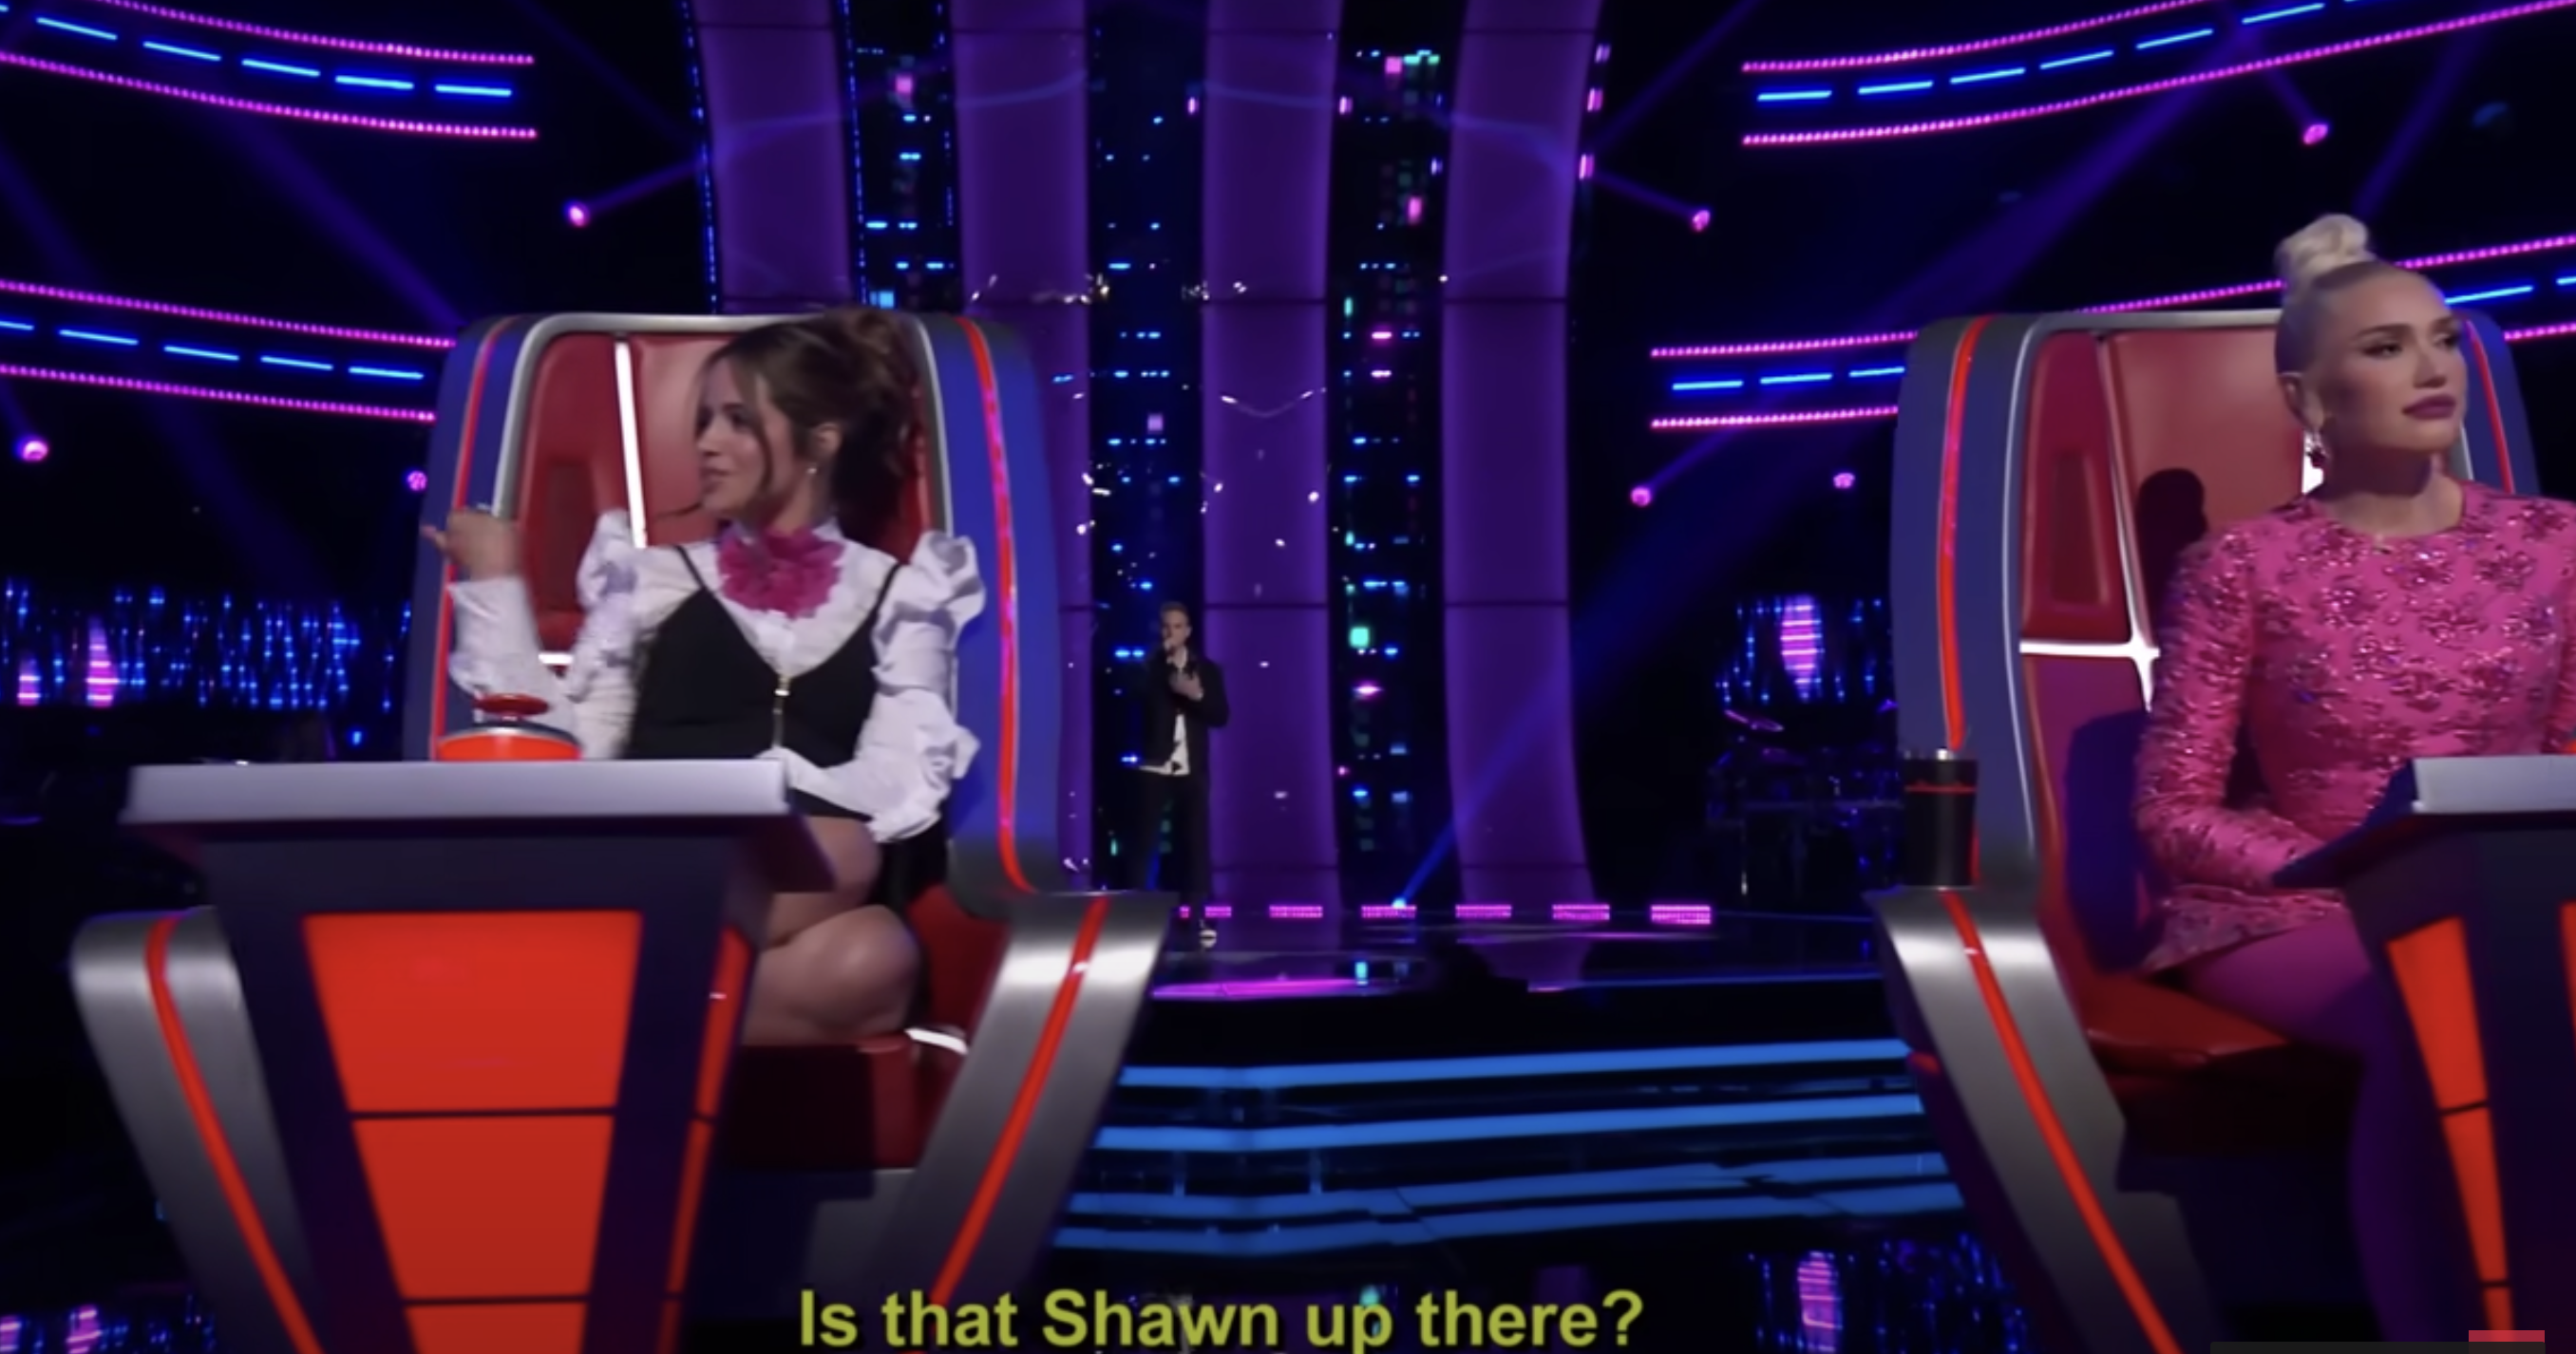 Camila asking if the singer is Shawn